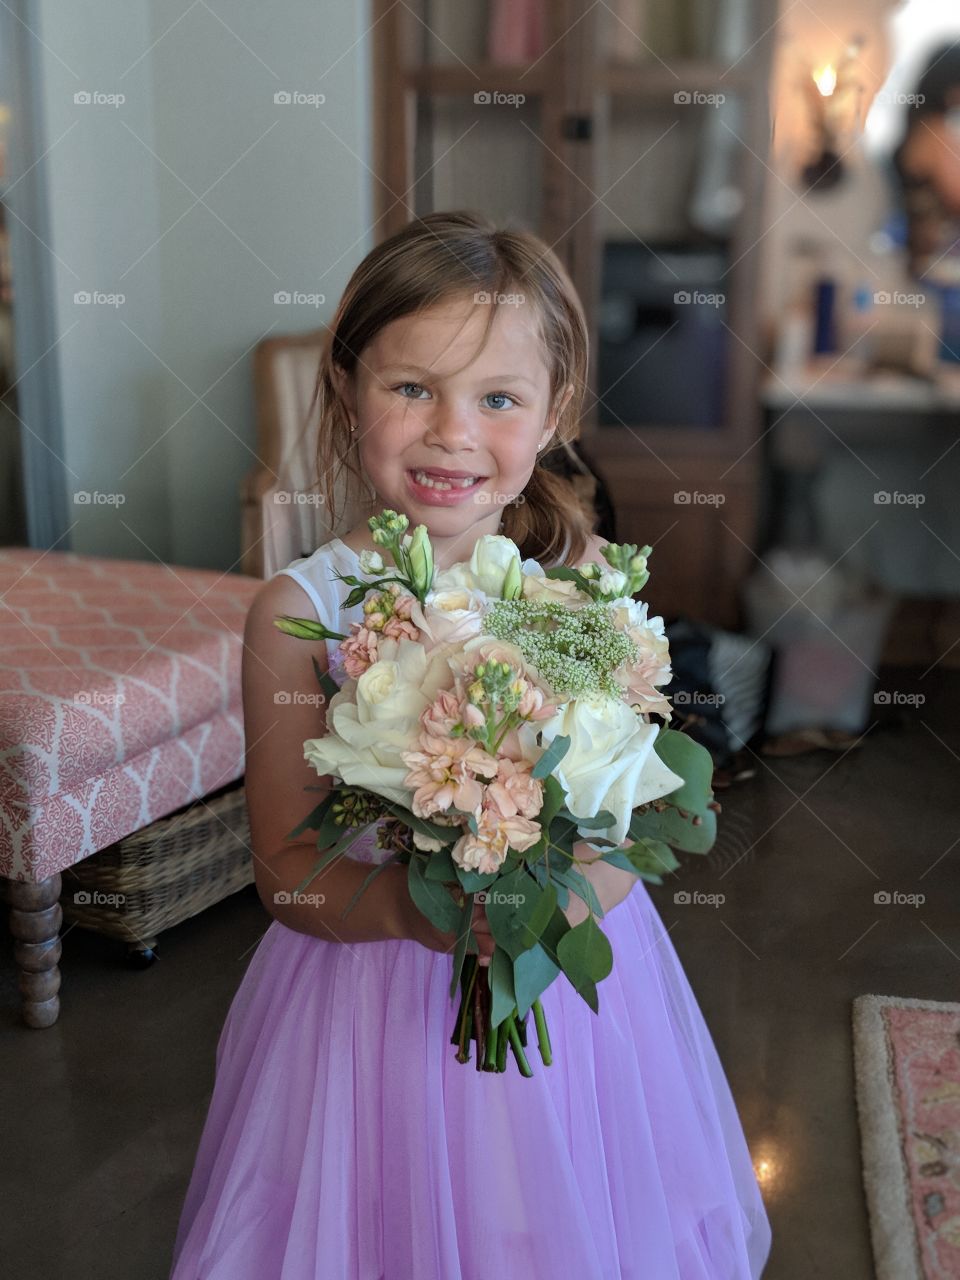 little girl just as happy as the engaged bride.